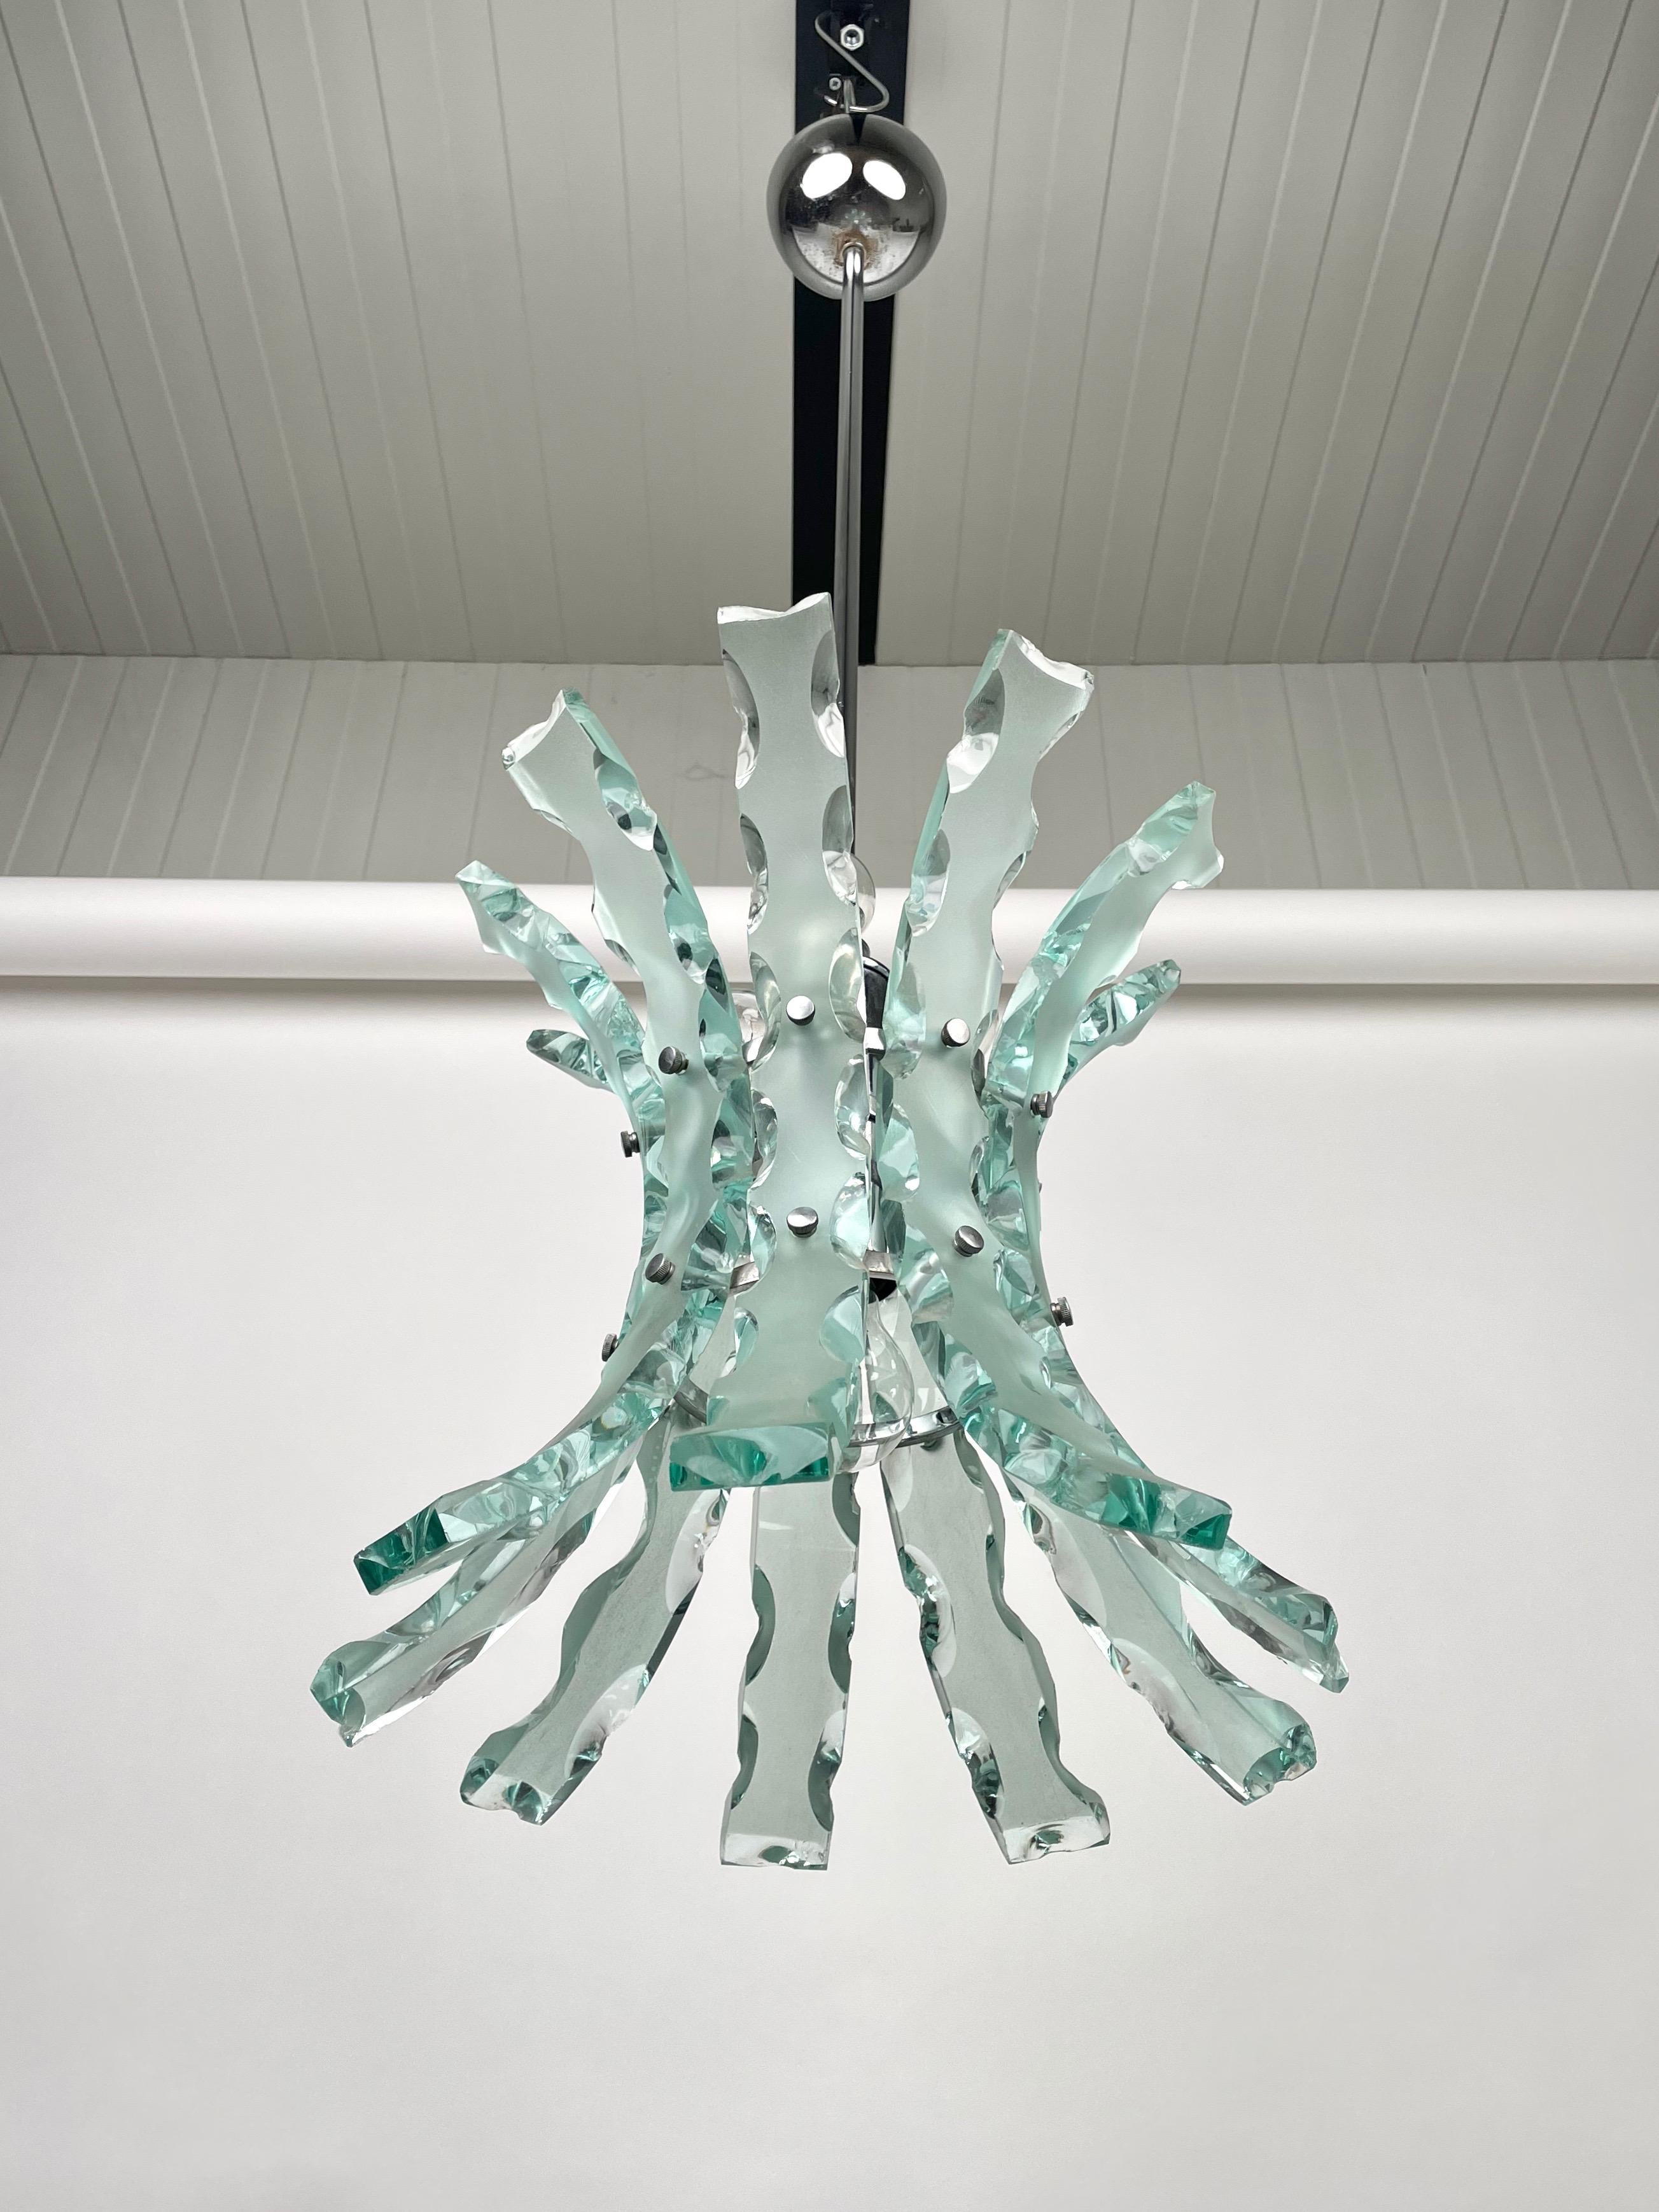 Curved Art glass and steel chandelier pendant by O4 (Zero Quattro) edited by Fontana Arte, Milano, Italy in the 1970s. The chandelier is composed of 9 glass and features 4 lights, three in the upper part and one on the bottom. Zero Quattro was a